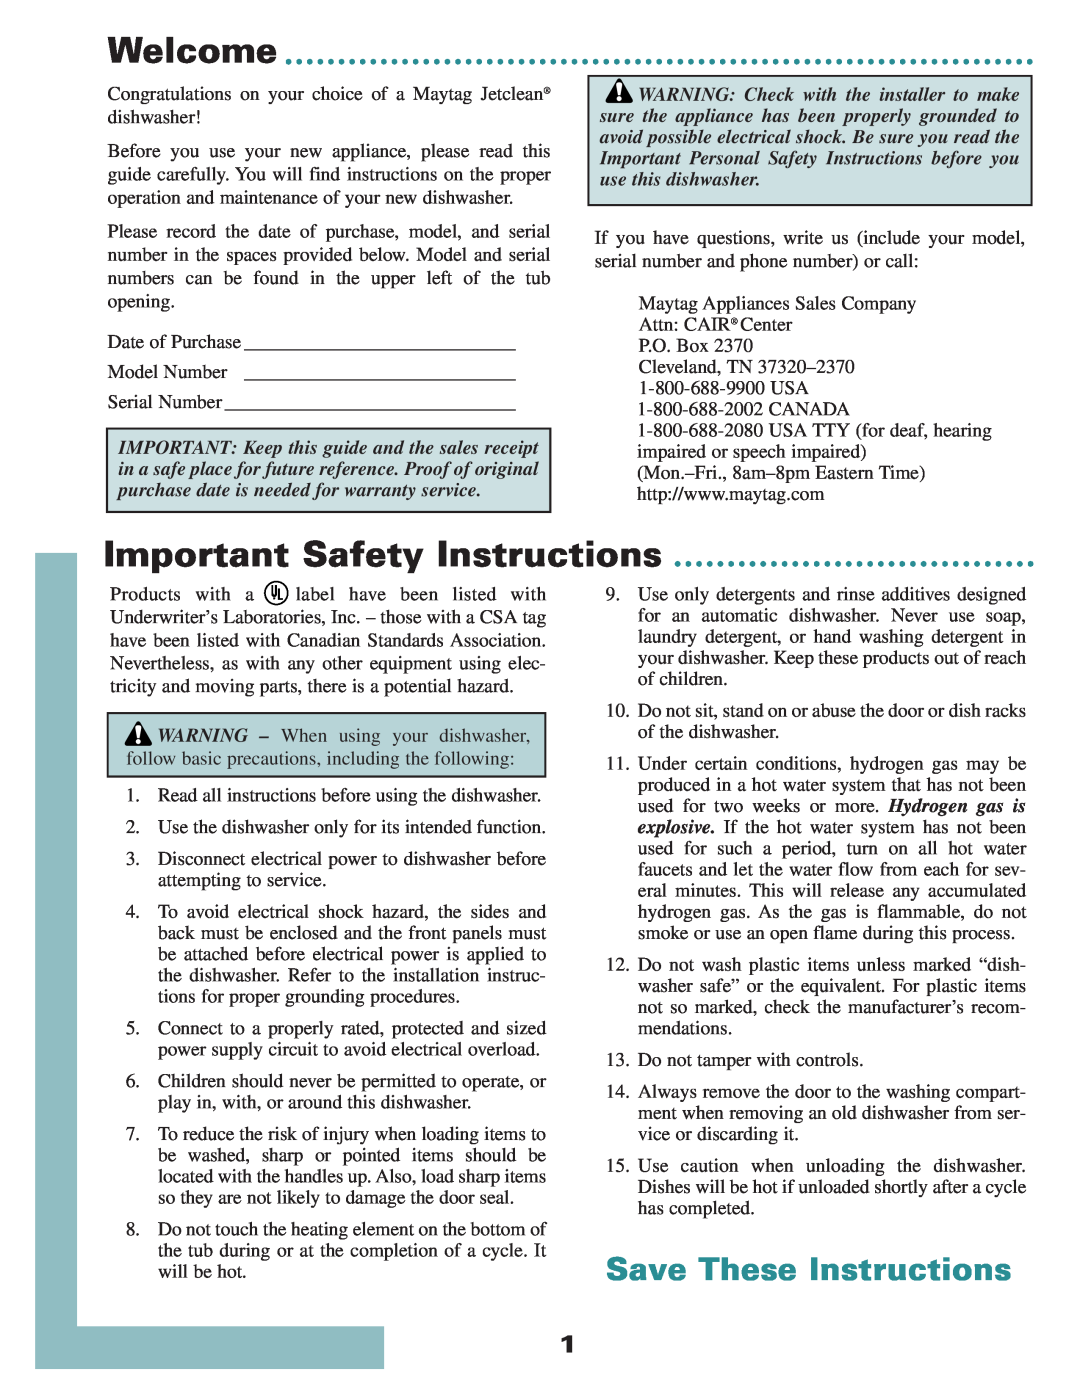 Maytag 6 915928 A warranty Welcome, Important Safety Instructions, Save These Instructions 